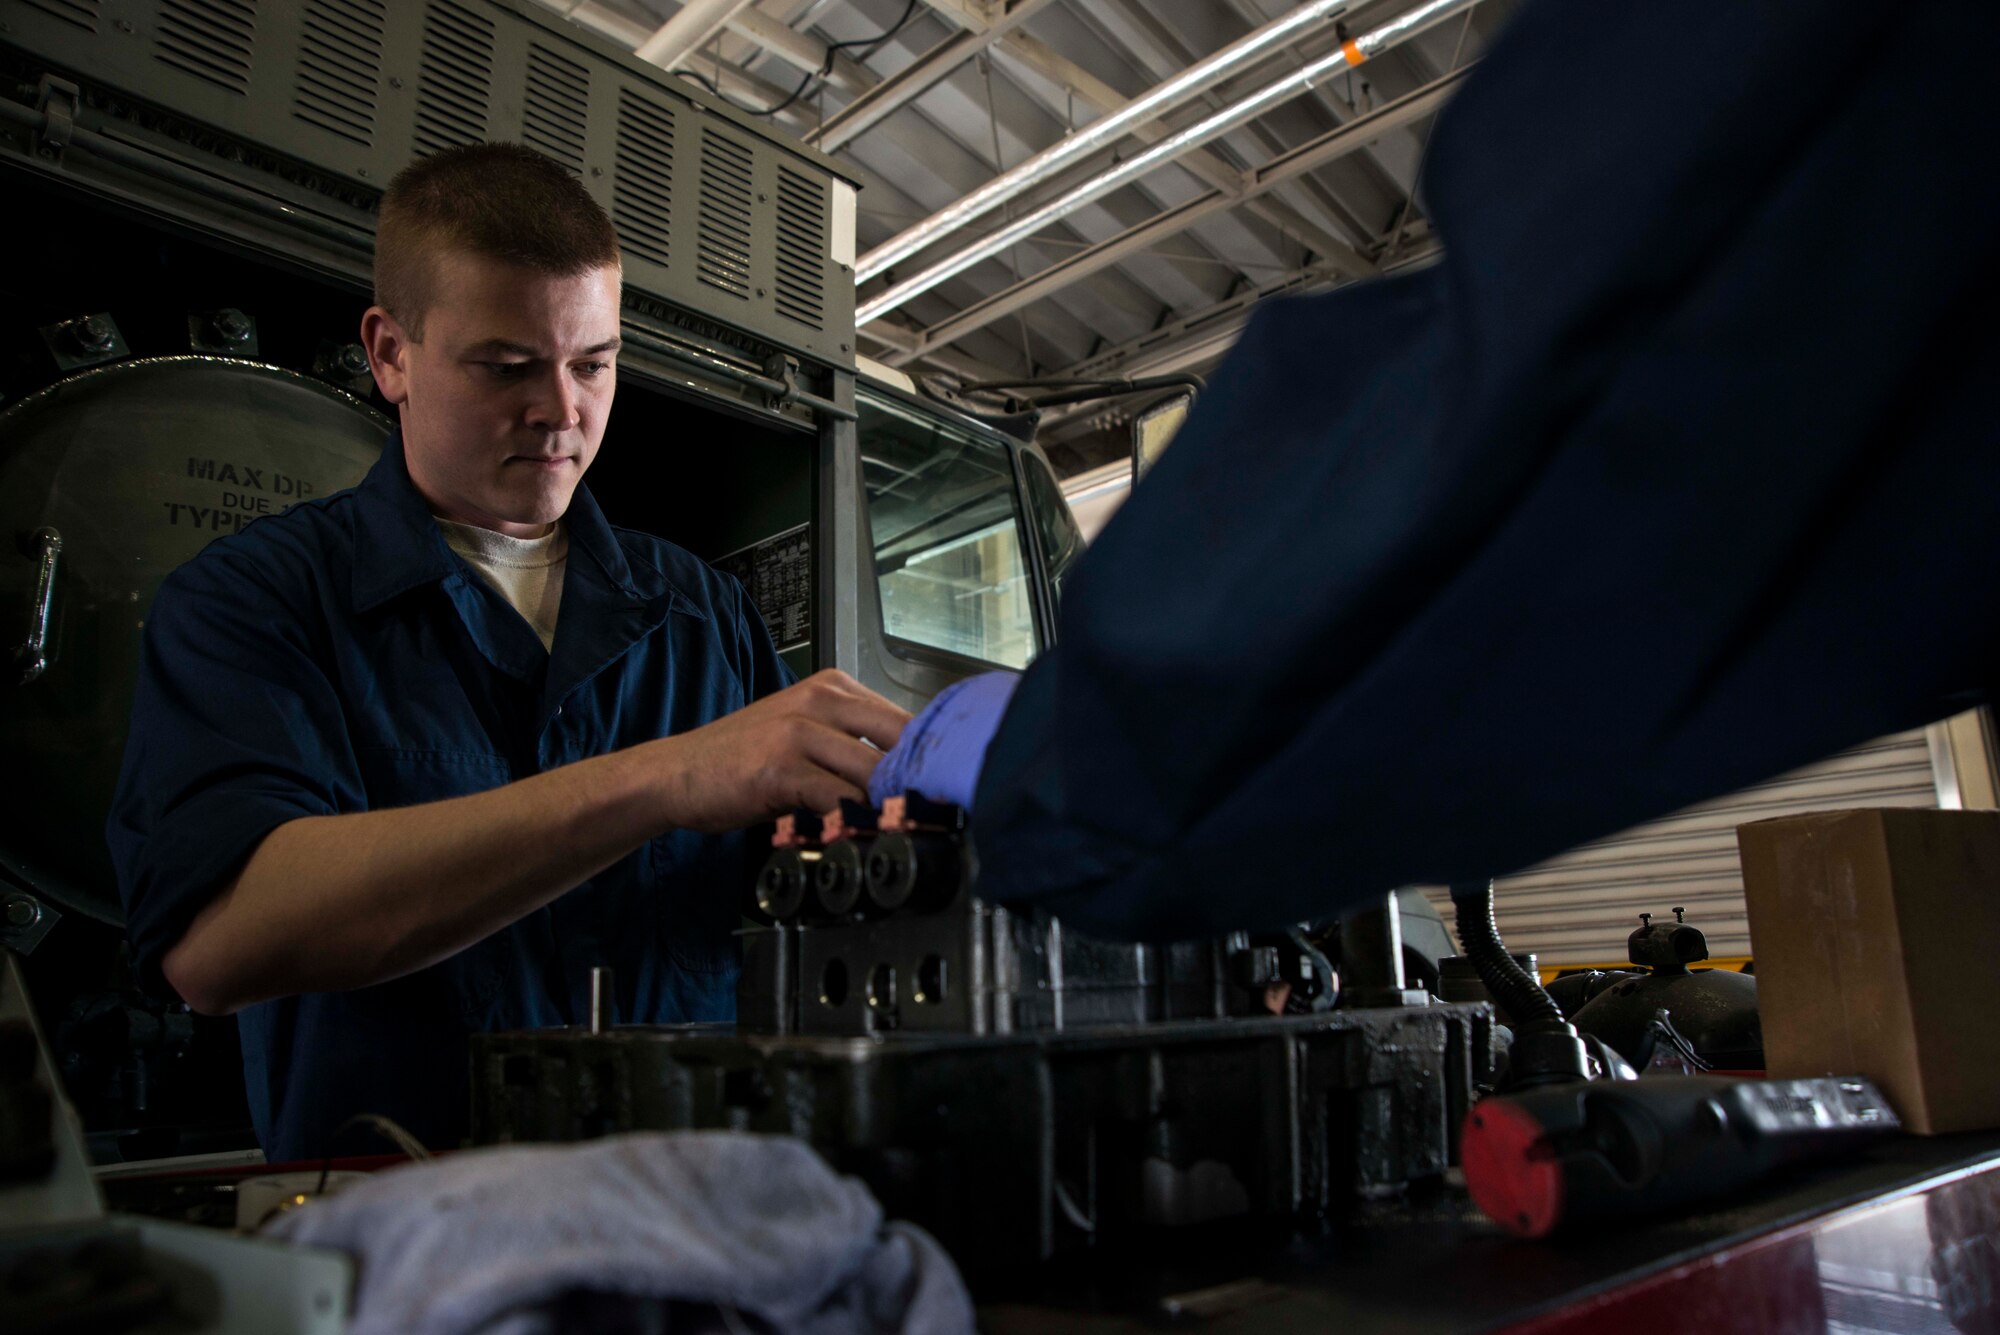 Senior Airman Jonah Myers, 35th Logistics Readiness Squadron fuels repairman, performs maintenance on the transmission of a fuel vehicle May 20, 2015, at Misawa Air Base, Japan. Myers services all the refueling assets at Misawa. (U.S. Air Force photo by Staff Sgt. Derek VanHorn/Released)